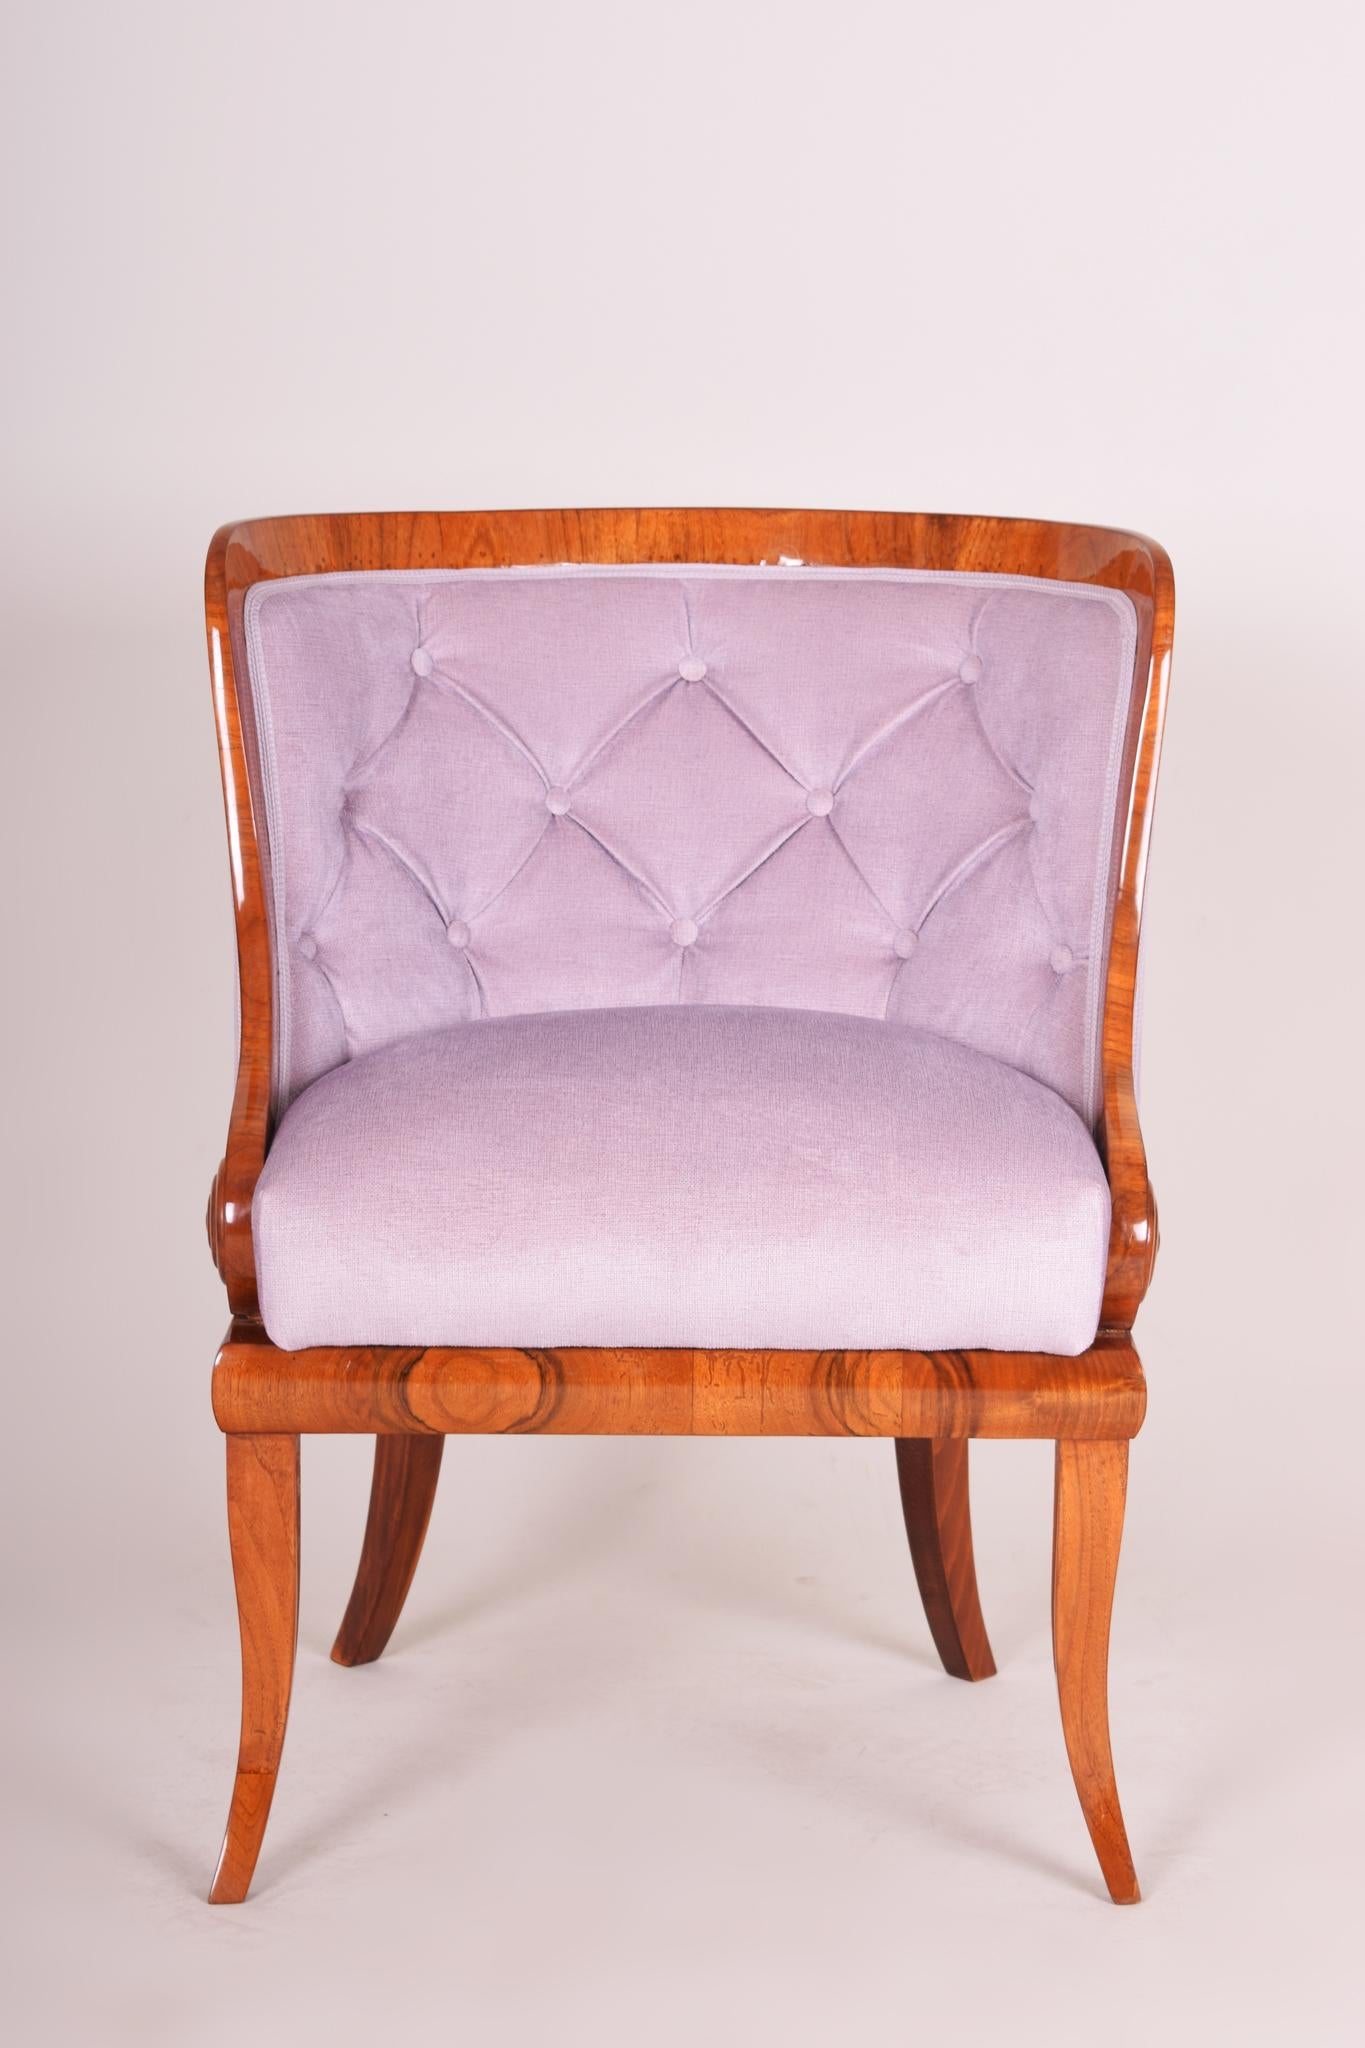 Biedermeier armchair.
This armchair belonged to the heritage of the Dalmberg family from the Bohemian castle in Dacice.
Material: Walnut.
Completely restored.
New fabric.
Shellac-polish.